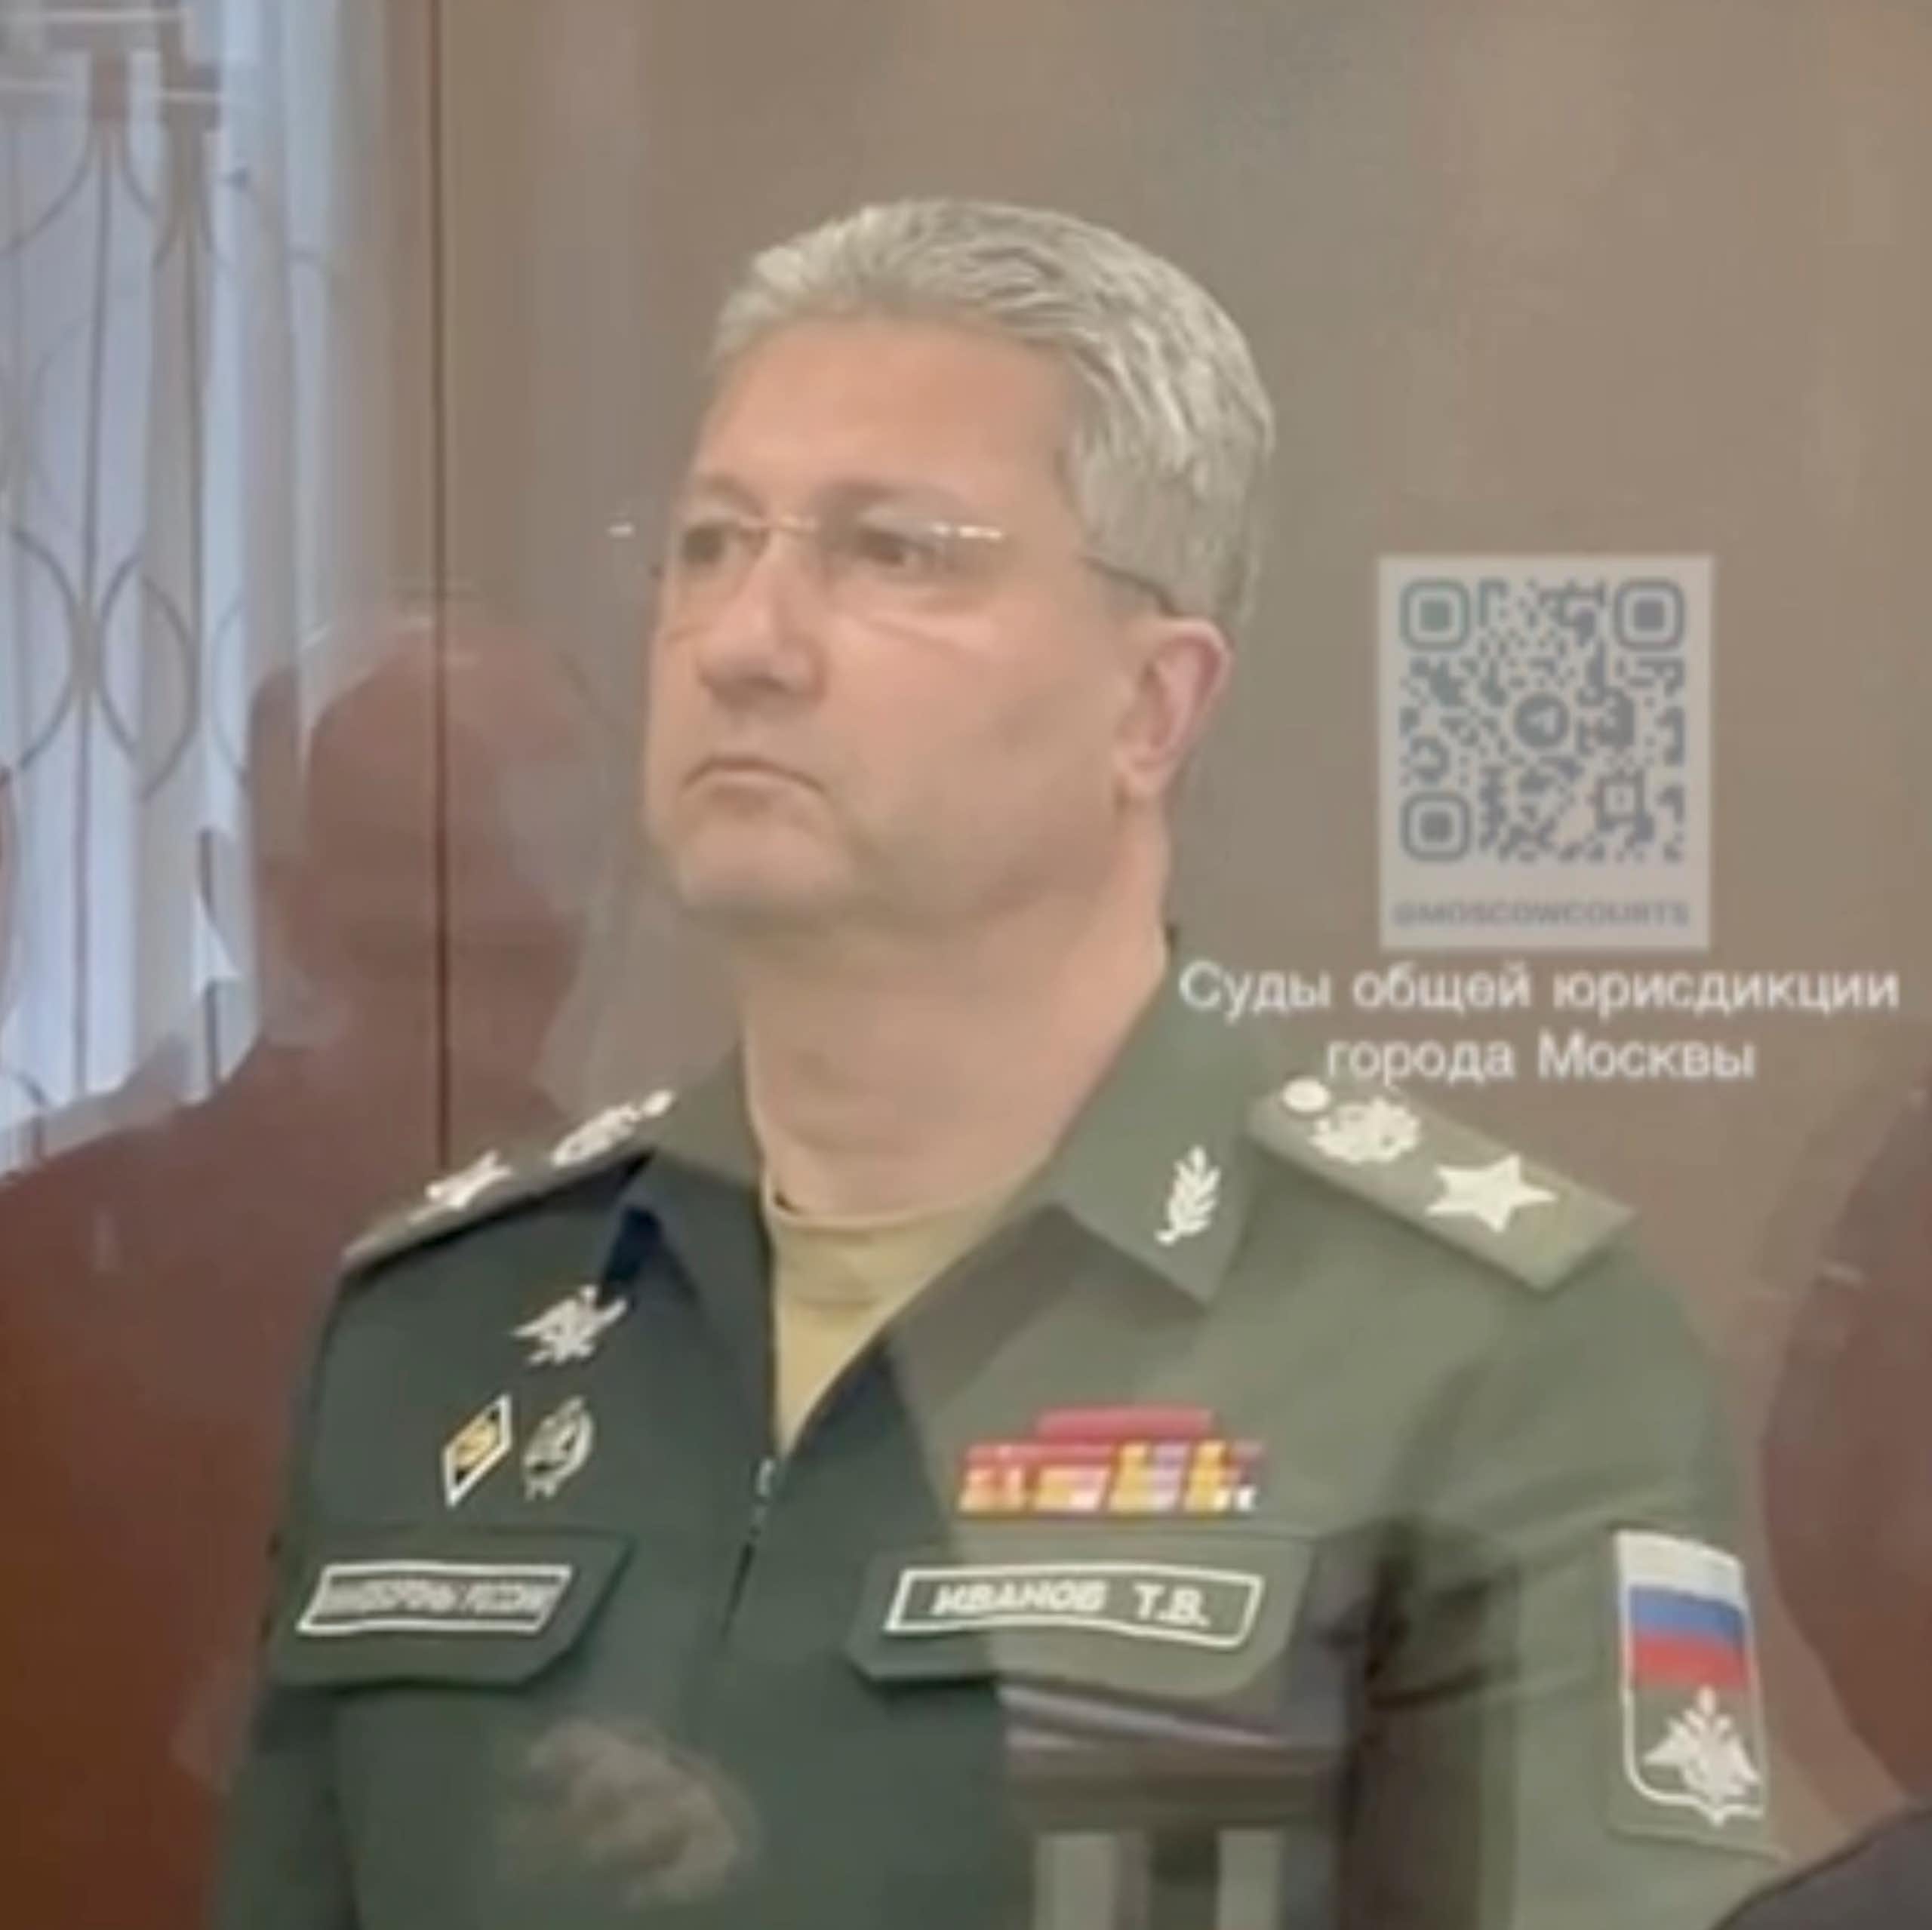 Russia: arrest of deputy defence minister on corruption charges reveals bitter factional infighting among the elite